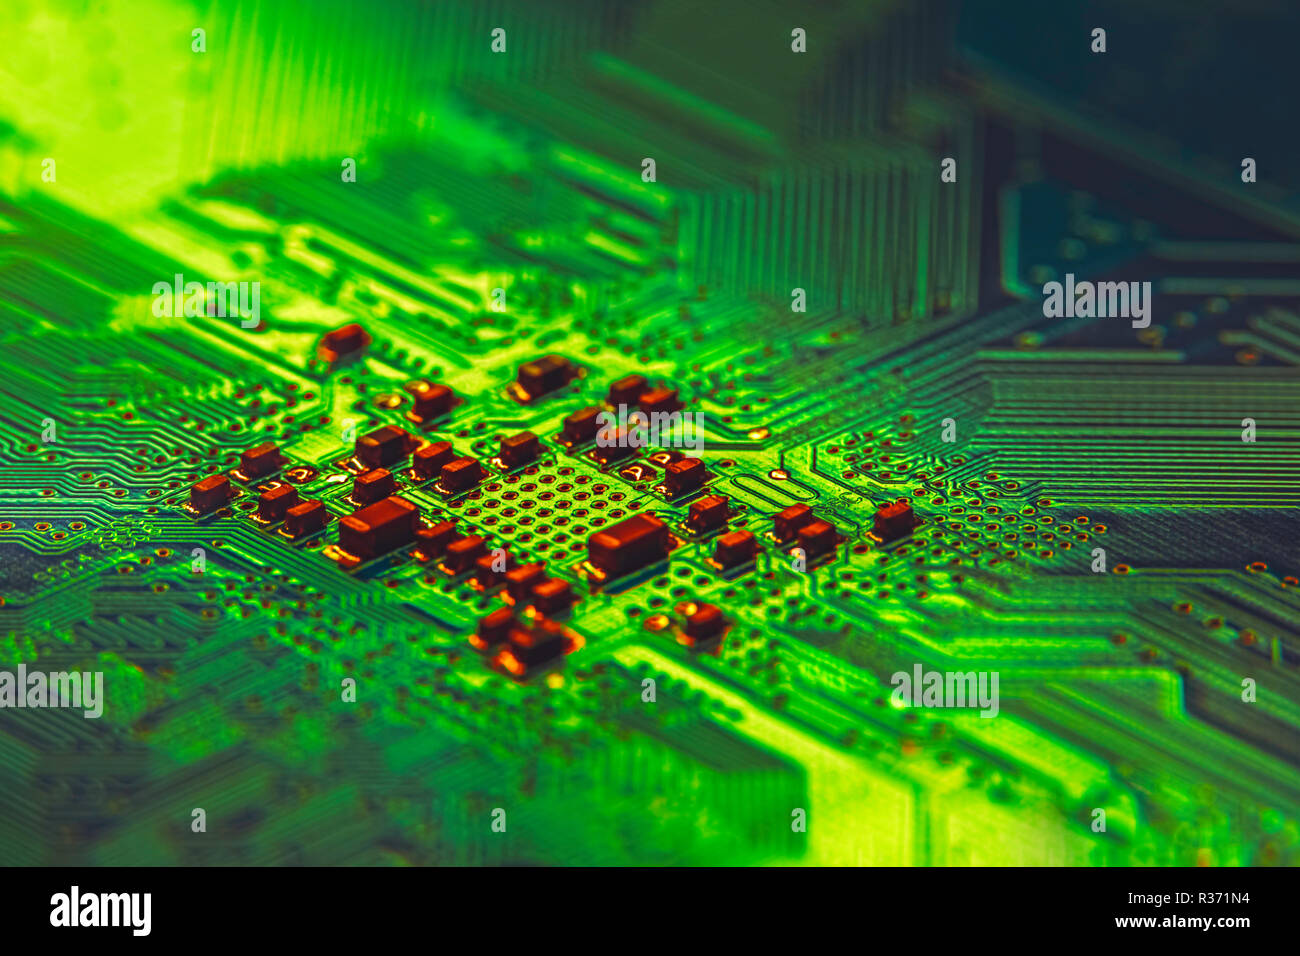 Background image texture of Motherboard digital microchips Stock Photo